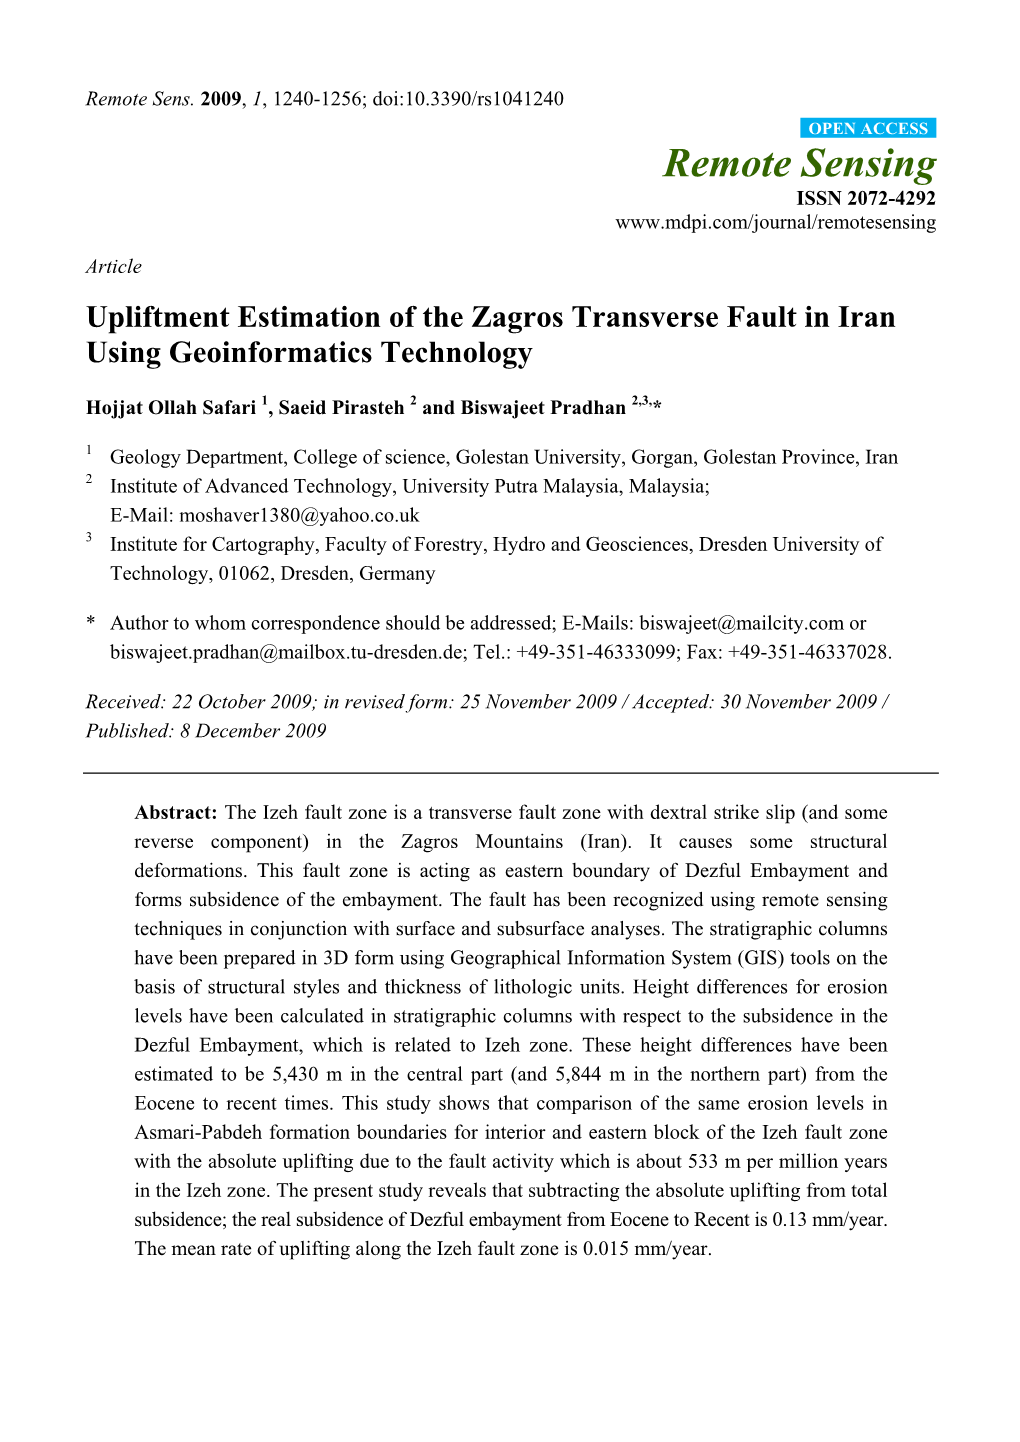 Upliftment Estimation of the Zagros Transverse Fault in Iran Using Geoinformatics Technology